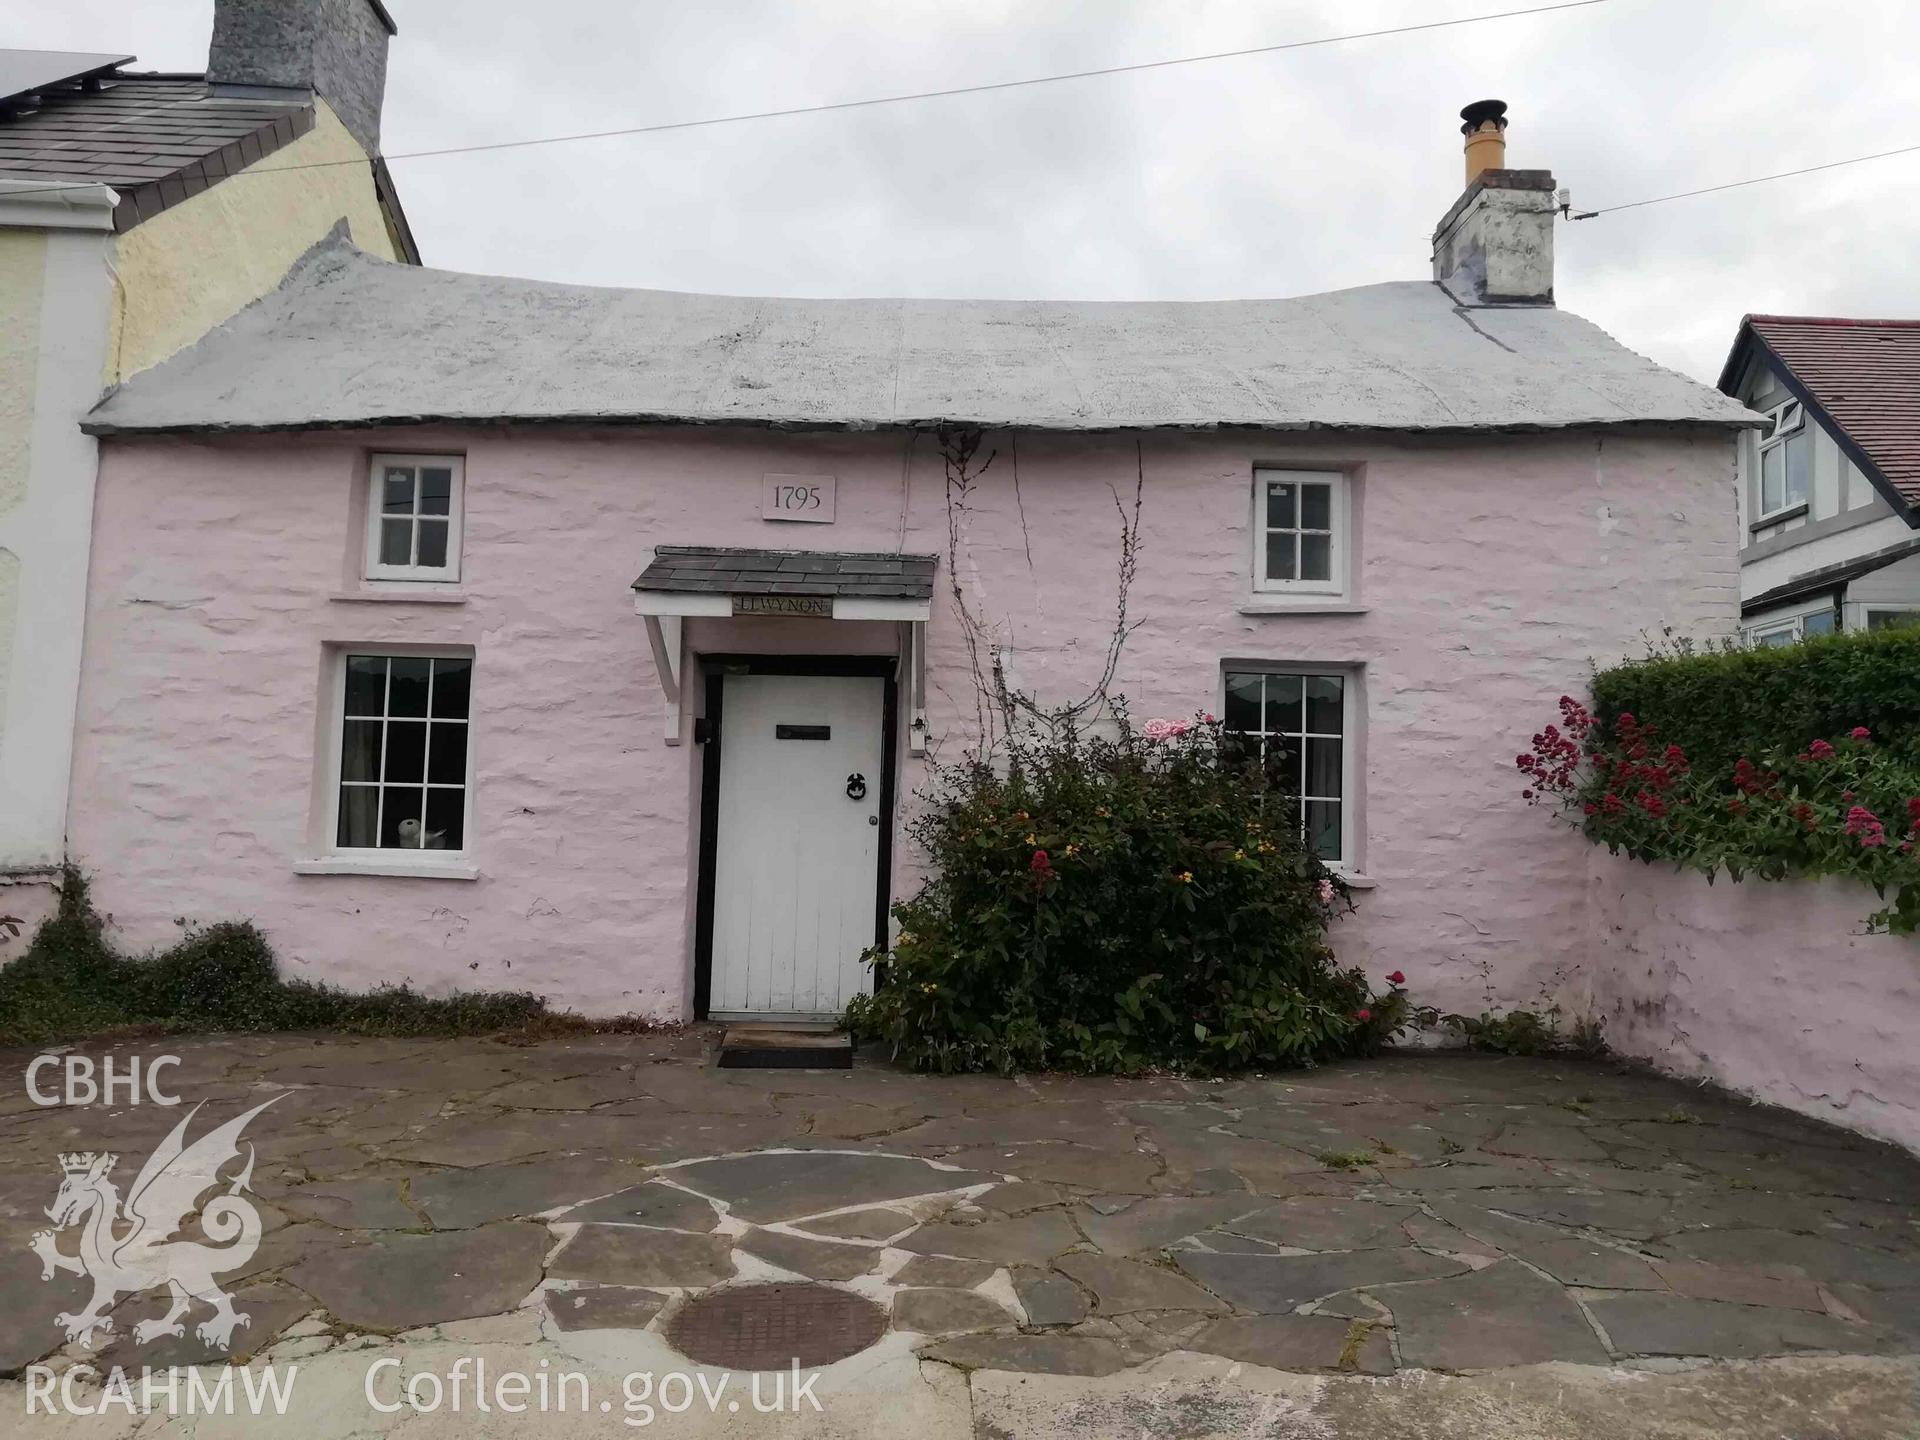 Digital colour photograph showing Llwynon, a traditional fishermans cottage built of stone, overlooking Aberporth beach, with a datestone 1795.